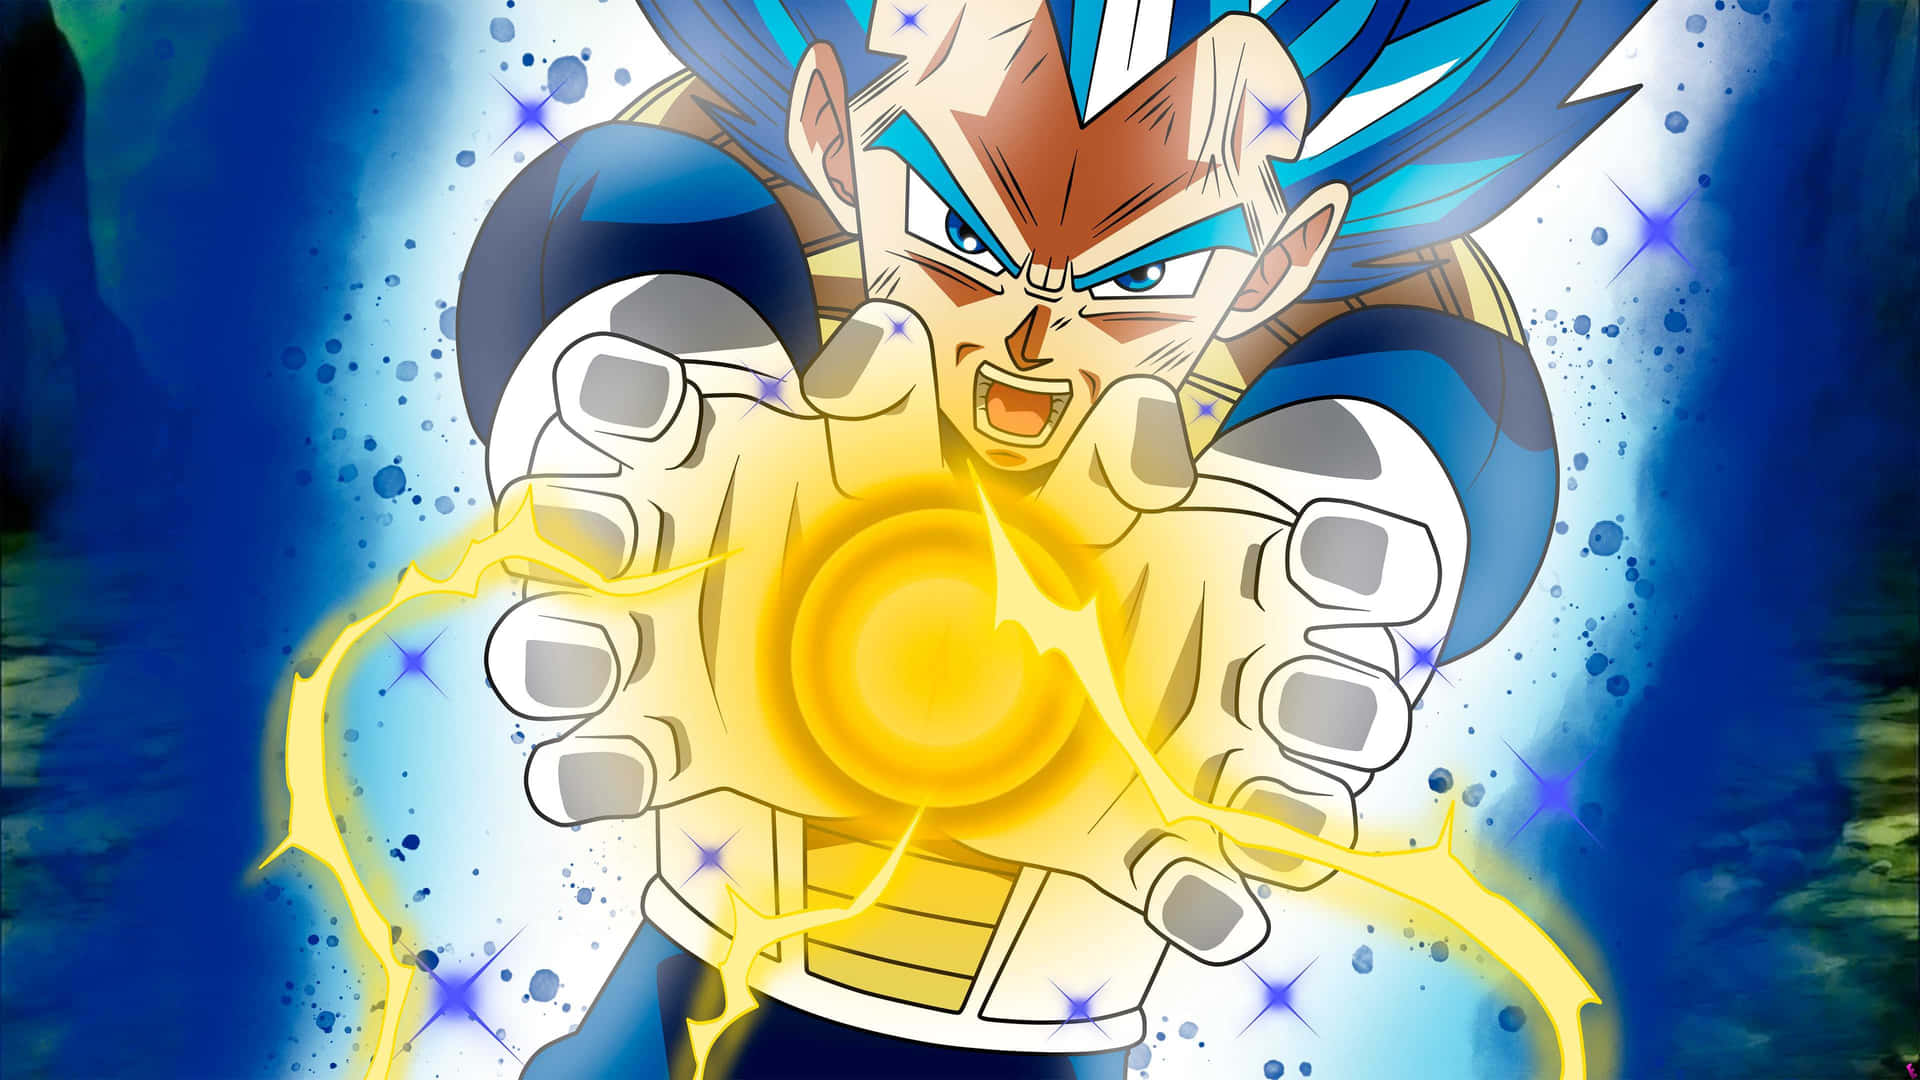 Majestic Vegeta in his Ultimate Form